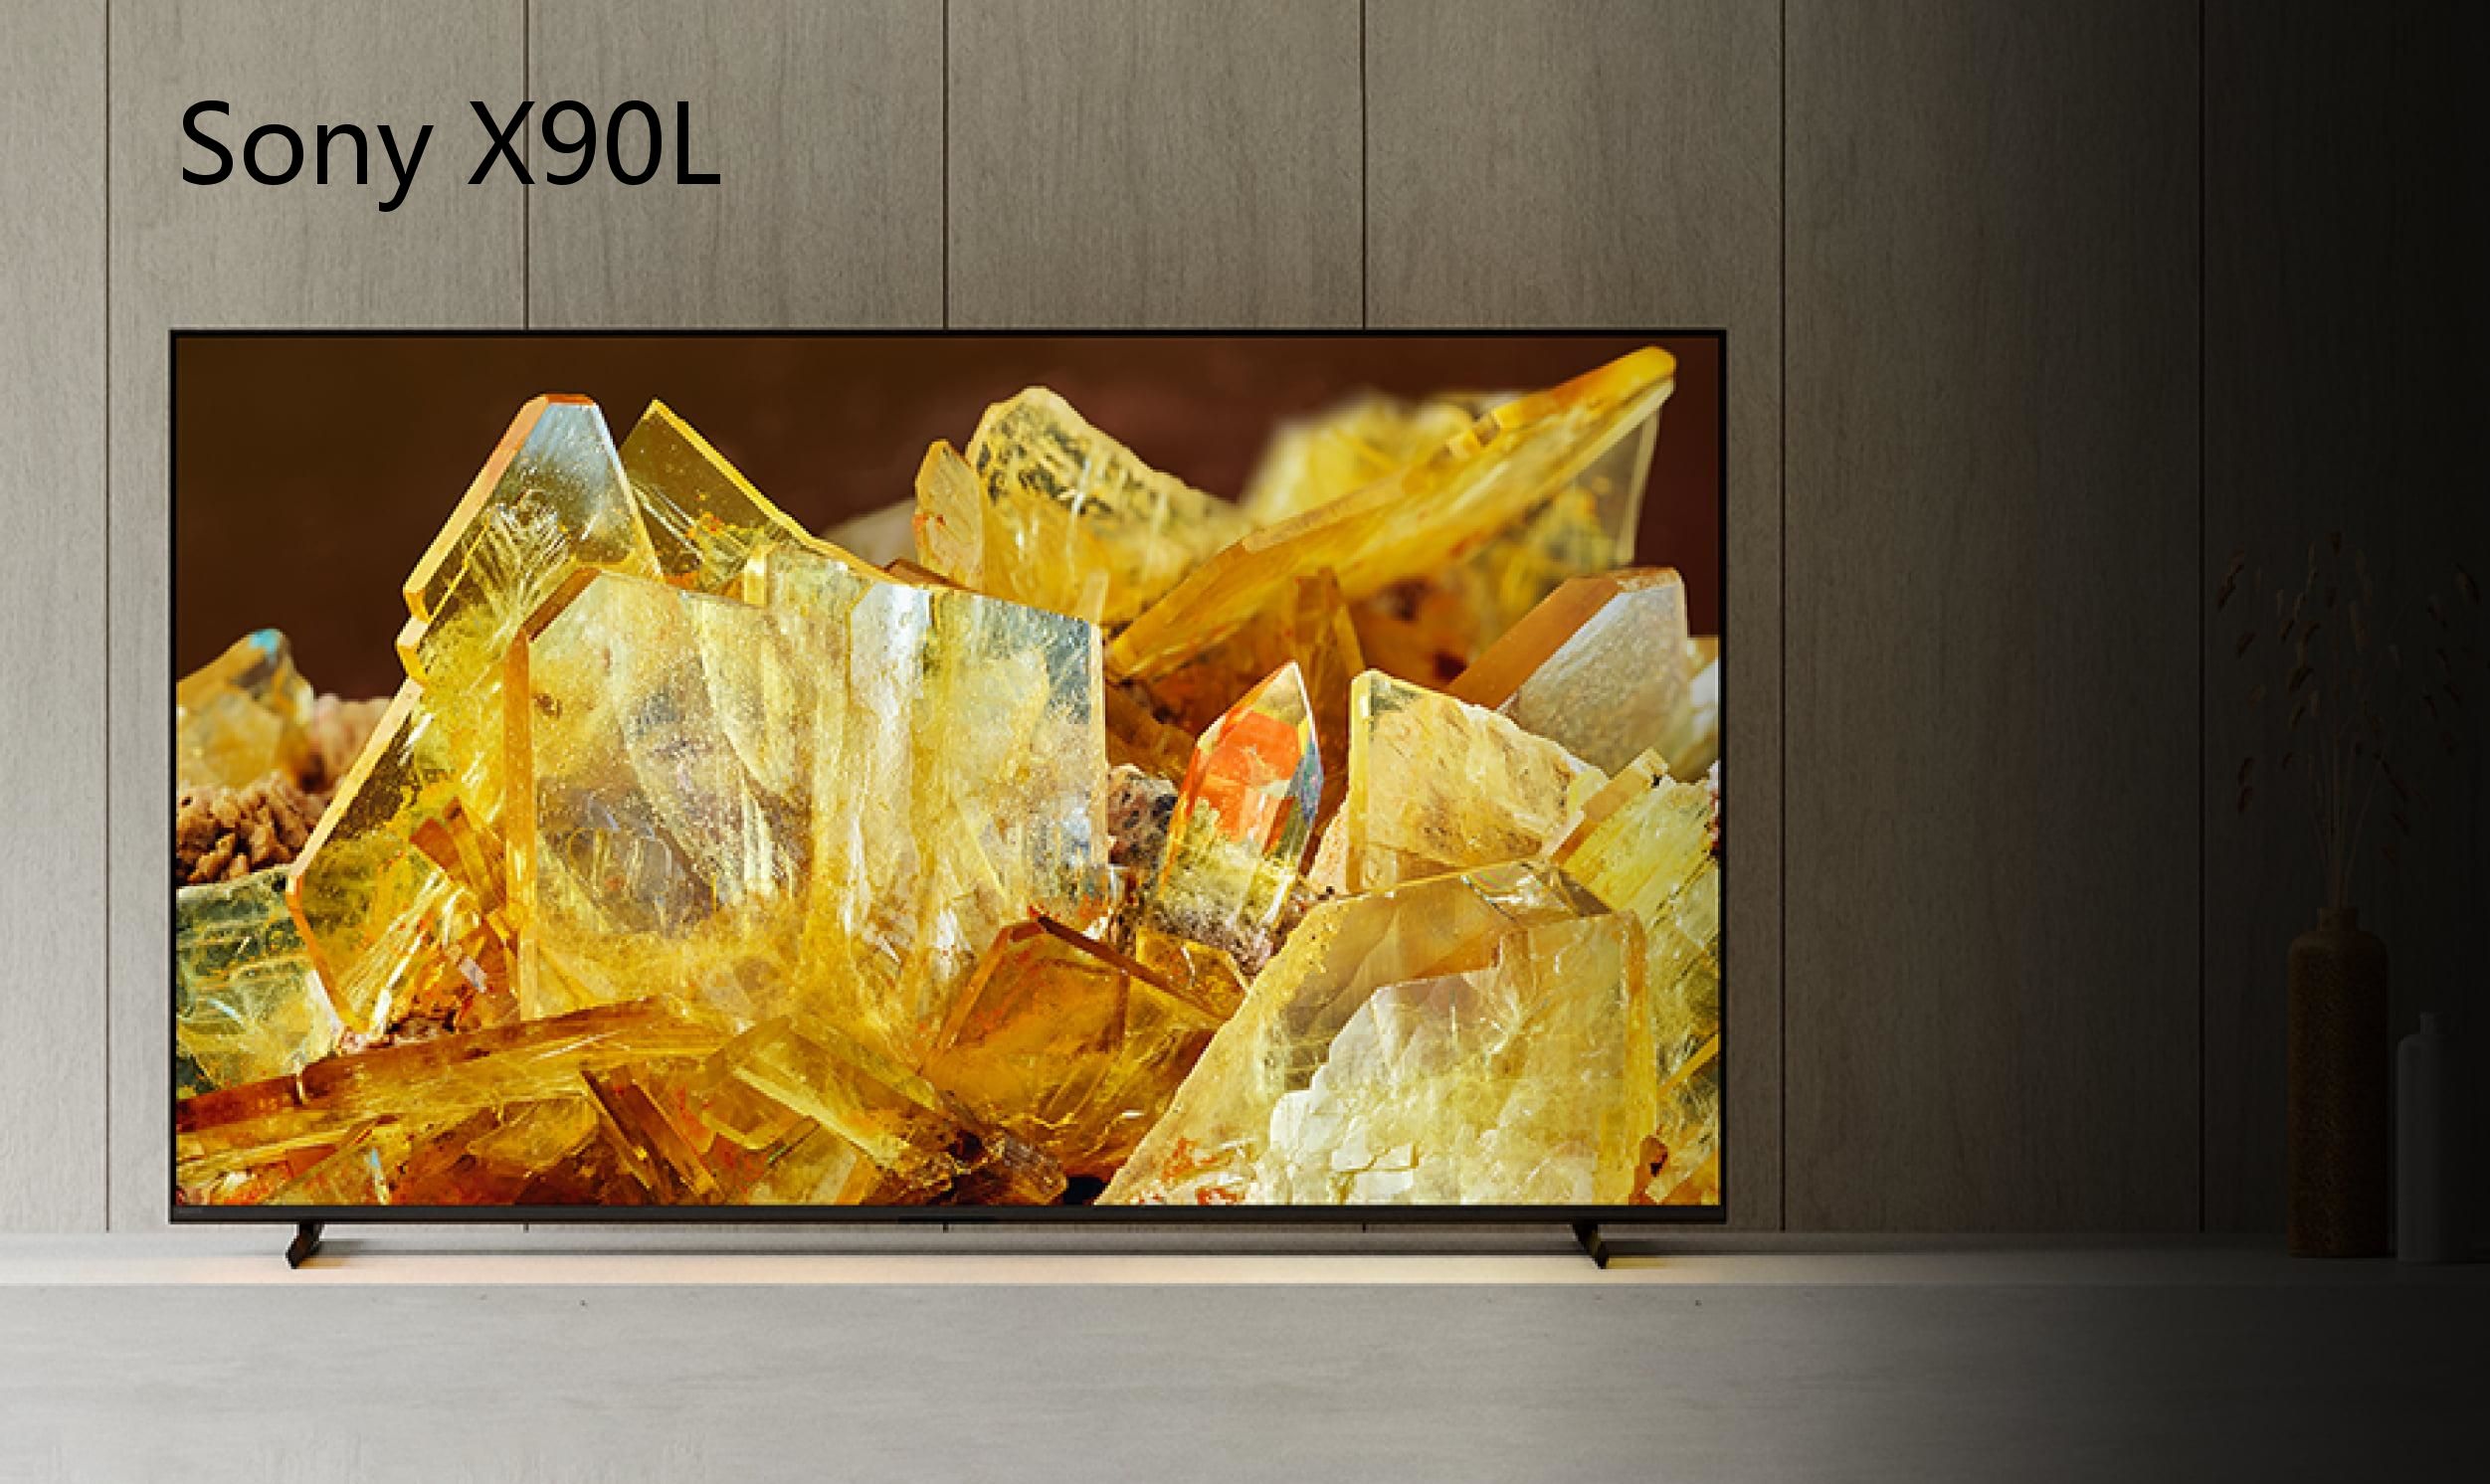 Sony X90L TV Specs Review, What's been updated?